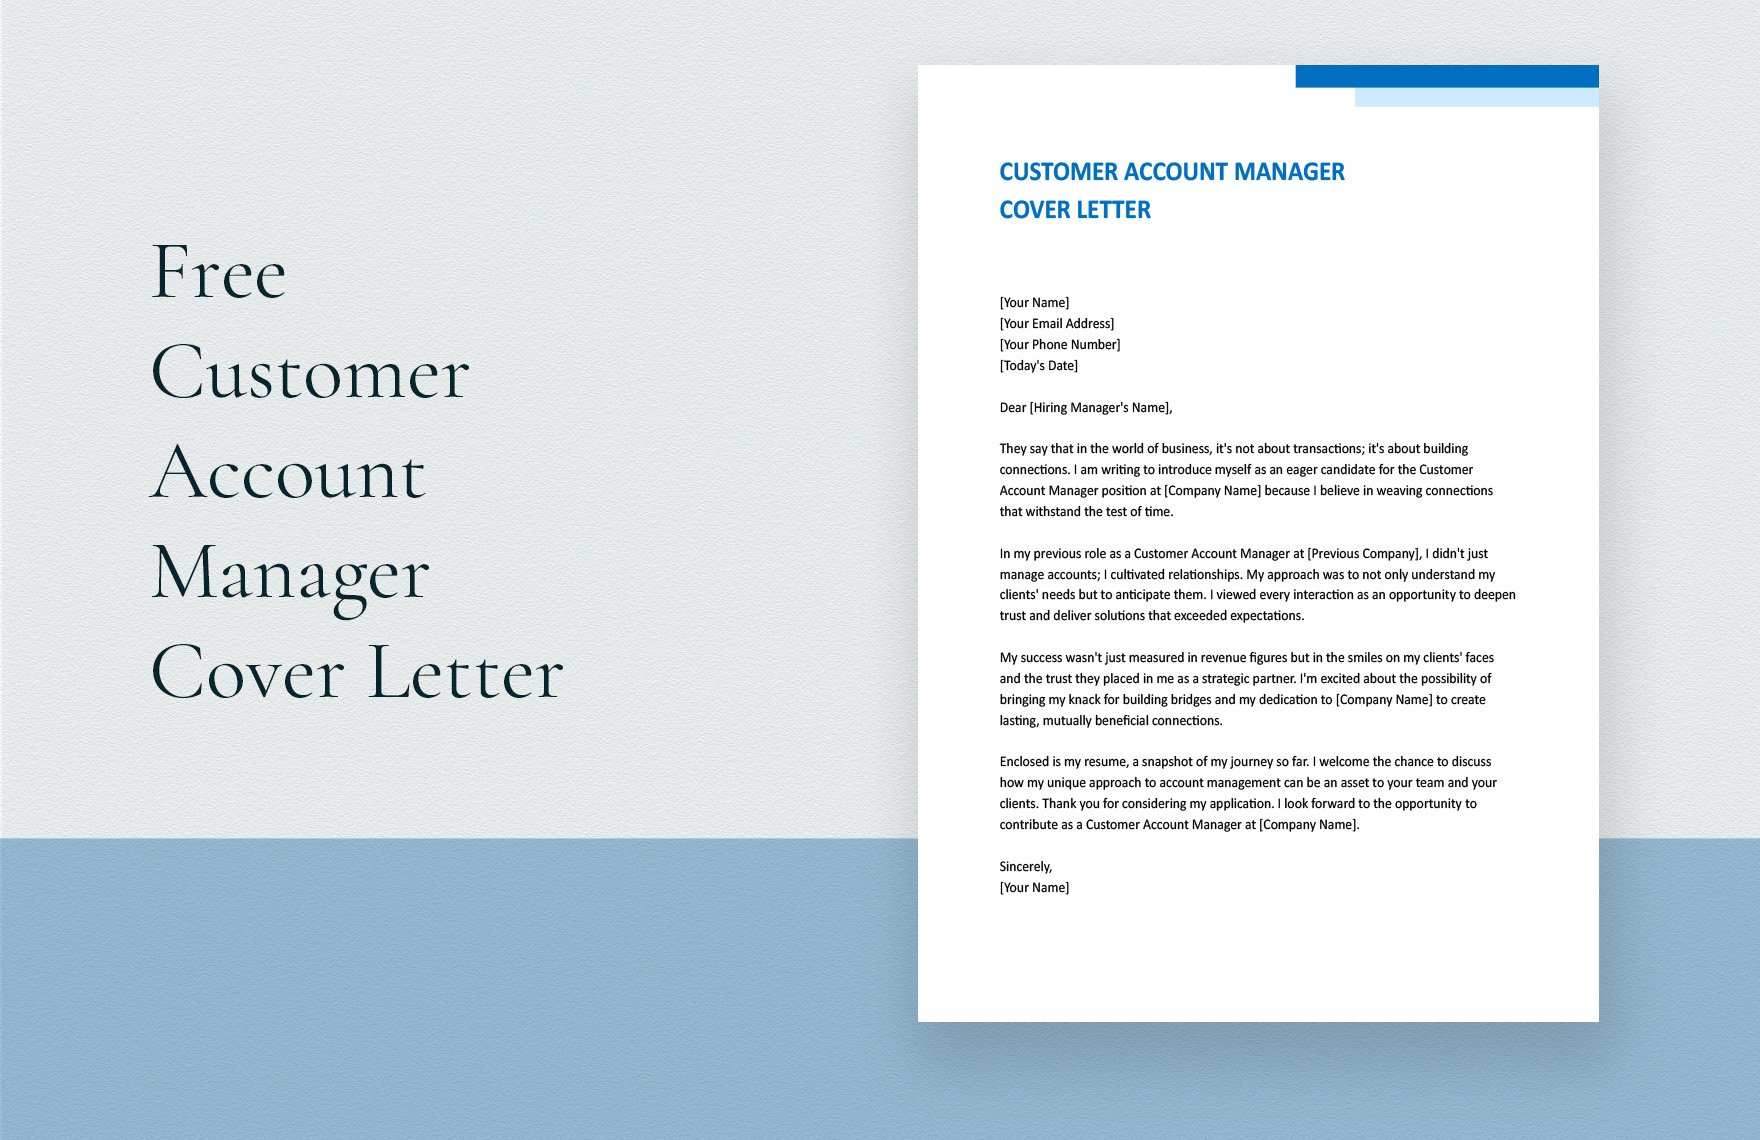 Customer Account Manager Cover Letter